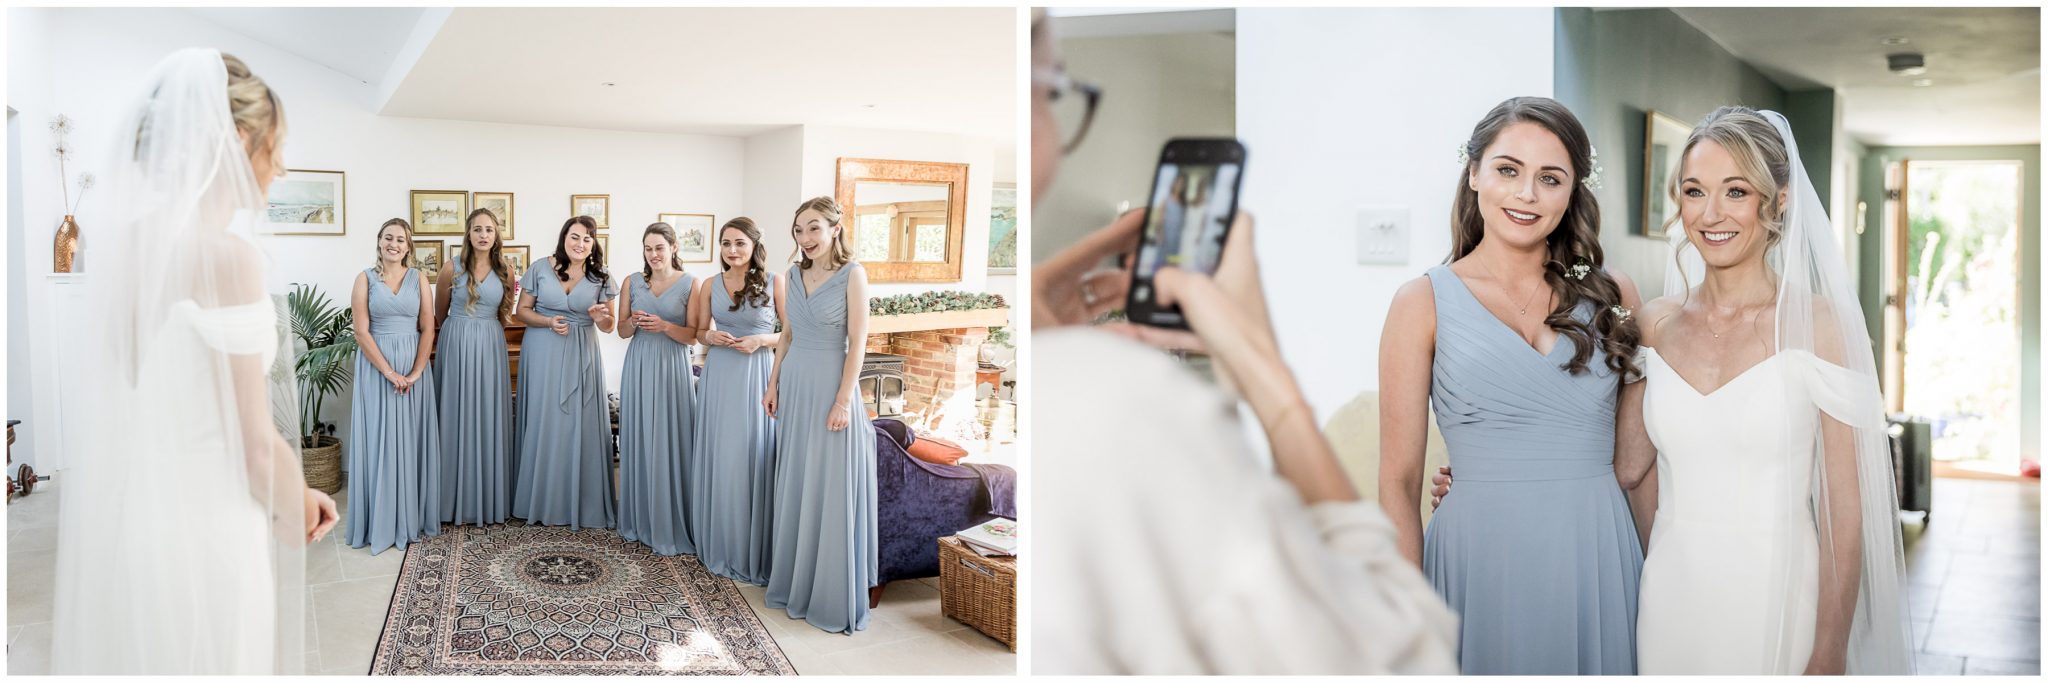 Bridesmaids react to seeing the bride in her wedding dress for the first time